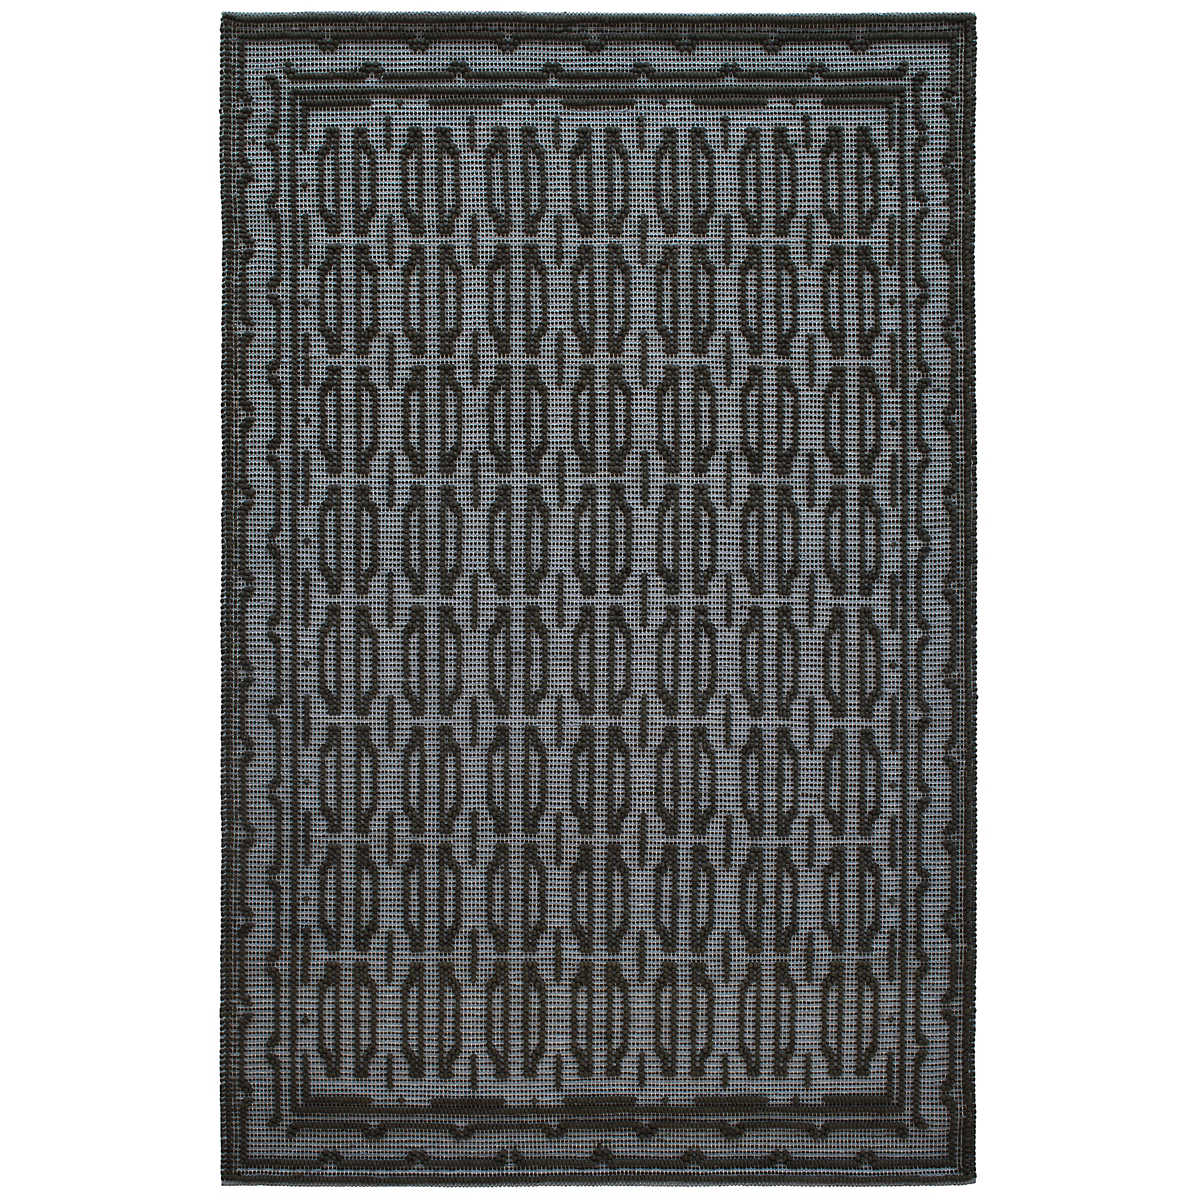 The Campbell Iron Rug relief pattern plays across a gently marled woven wool ground, accentuating the graphic dimension created by the different weaves. The central motif is repeated inversely to create a border around this sumptuous rug. Amethyst Home provides interior design services, furniture, rugs, and lighting in the Salt Lake City metro area.